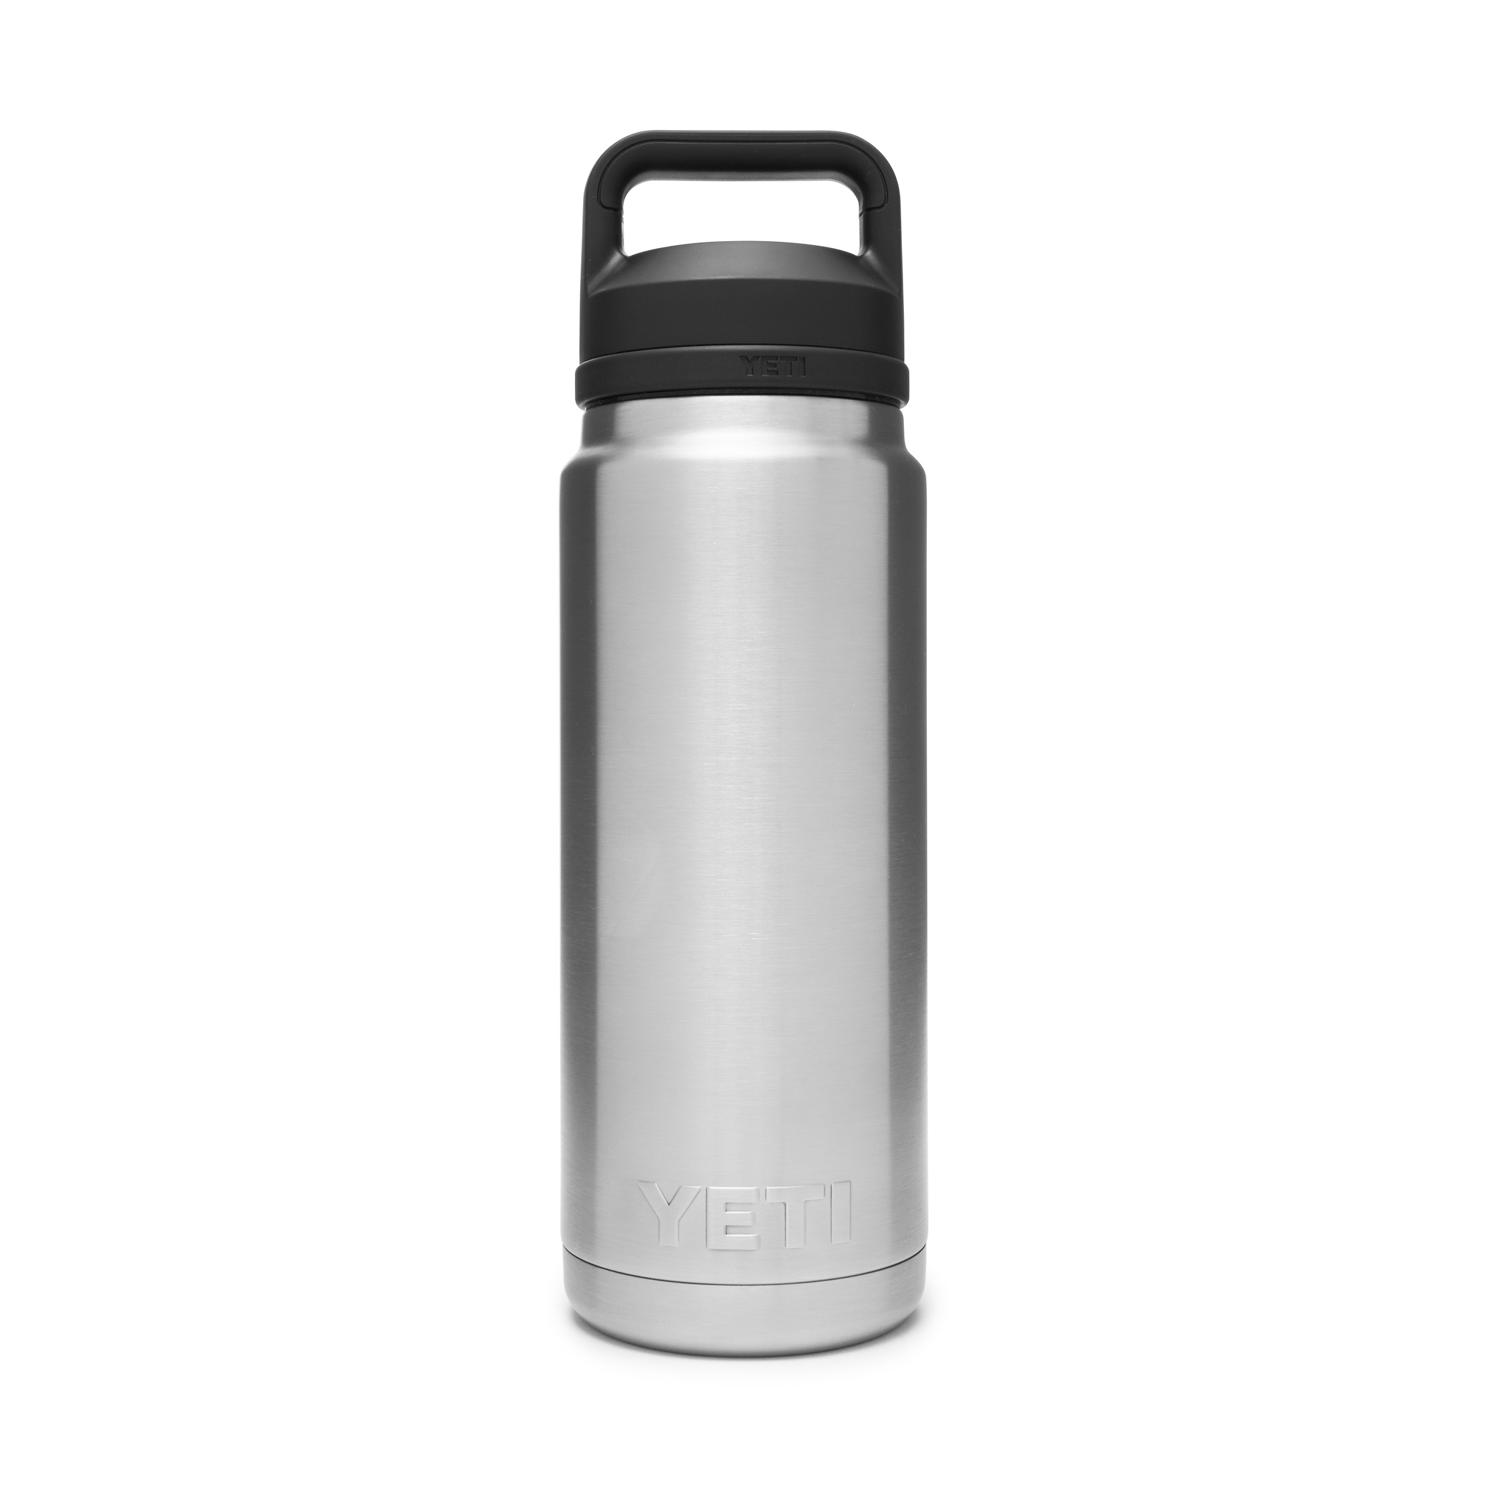 Studio Oh! Insulated Water Bottle - 20-Ounce Snap-Hook Stainless Steel  Water Bottles - BPA-Free Hive a Nice Day